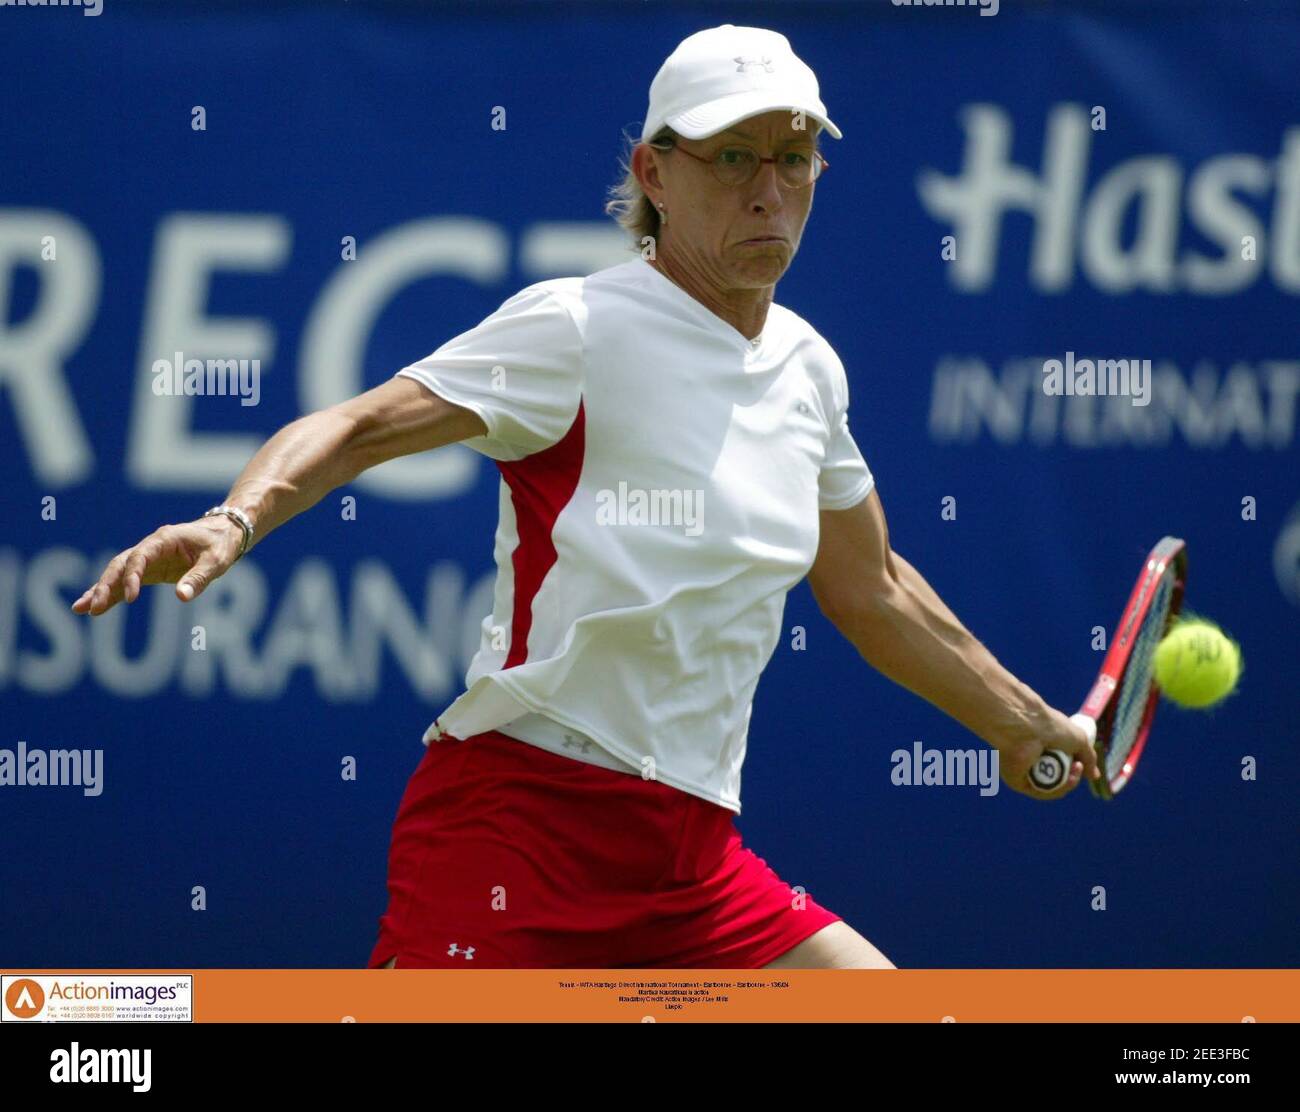 Tennis - WTA Hastings Direct International Tournament - Eastbourne -  Eastbourne - 13/6/04 Martina Navratilova in action Mandatory Credit: Action  Images / Lee Mills Livepic Stock Photo - Alamy